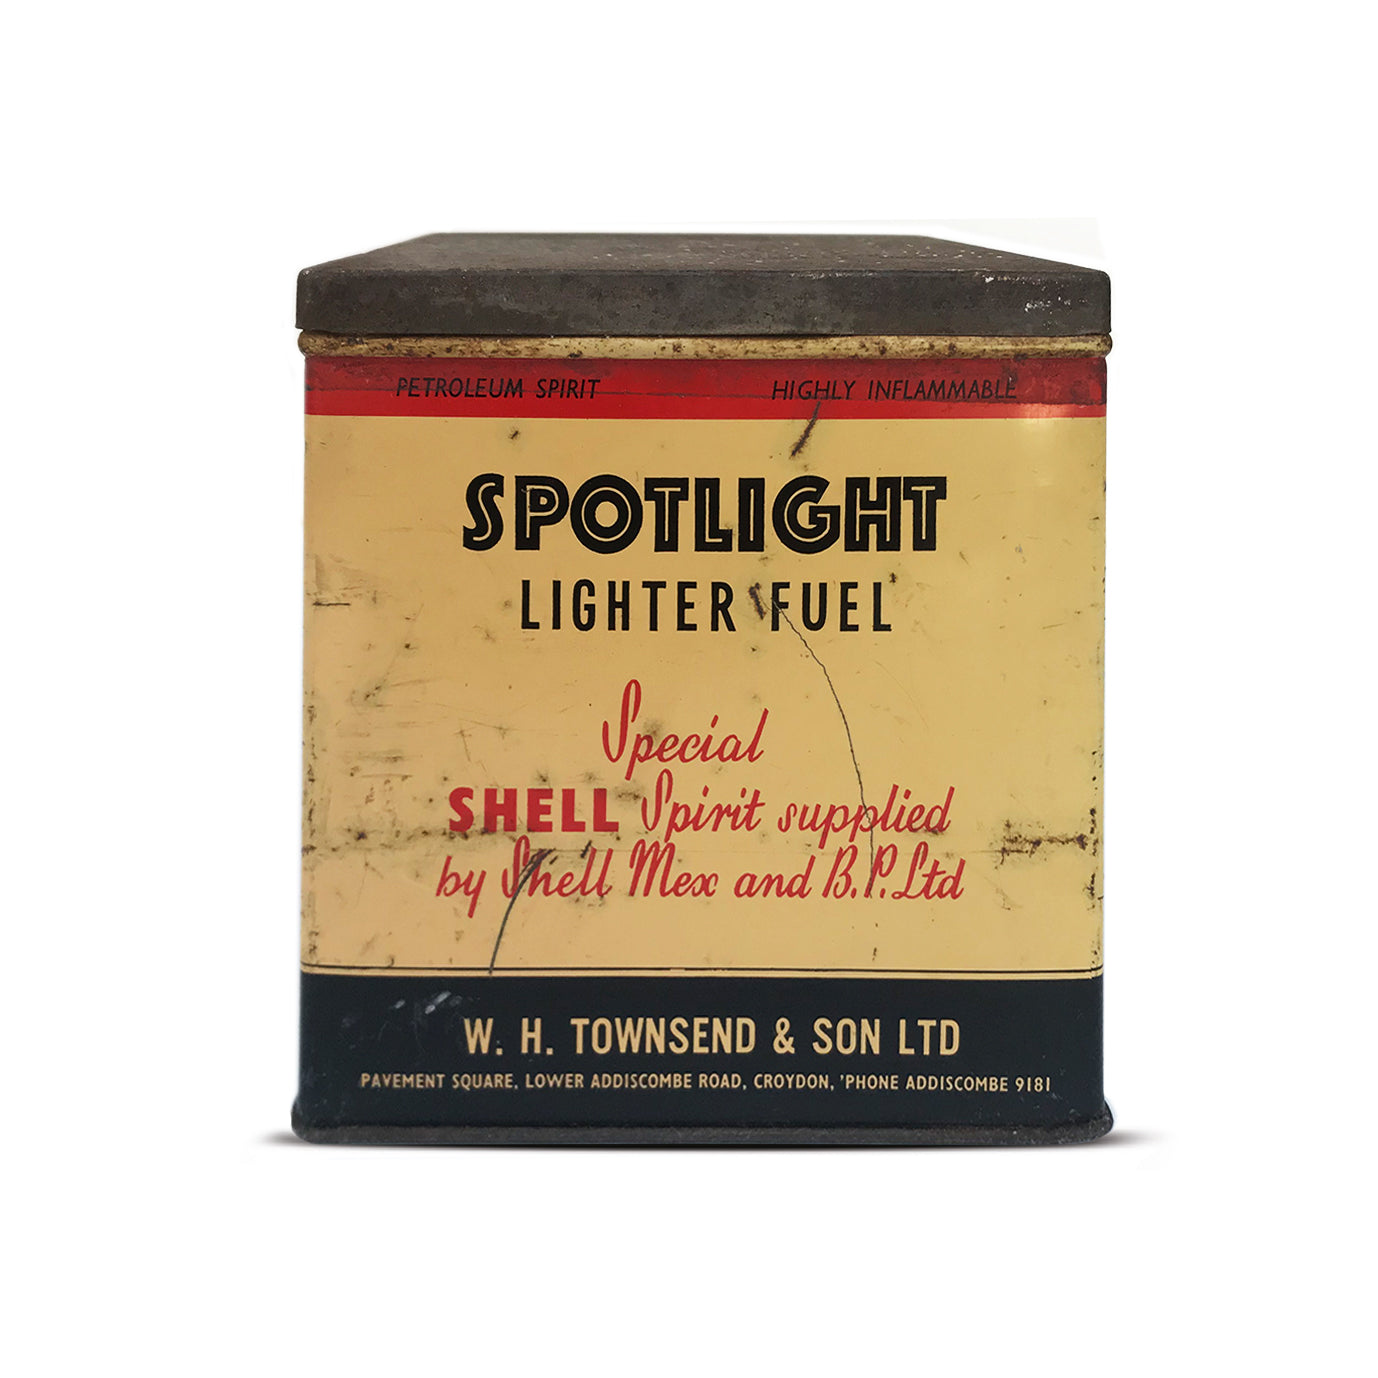 Vintage Spotlight Tin. Find this and other Vintage Tins & Toys for sale at Intovintage.co.uk.